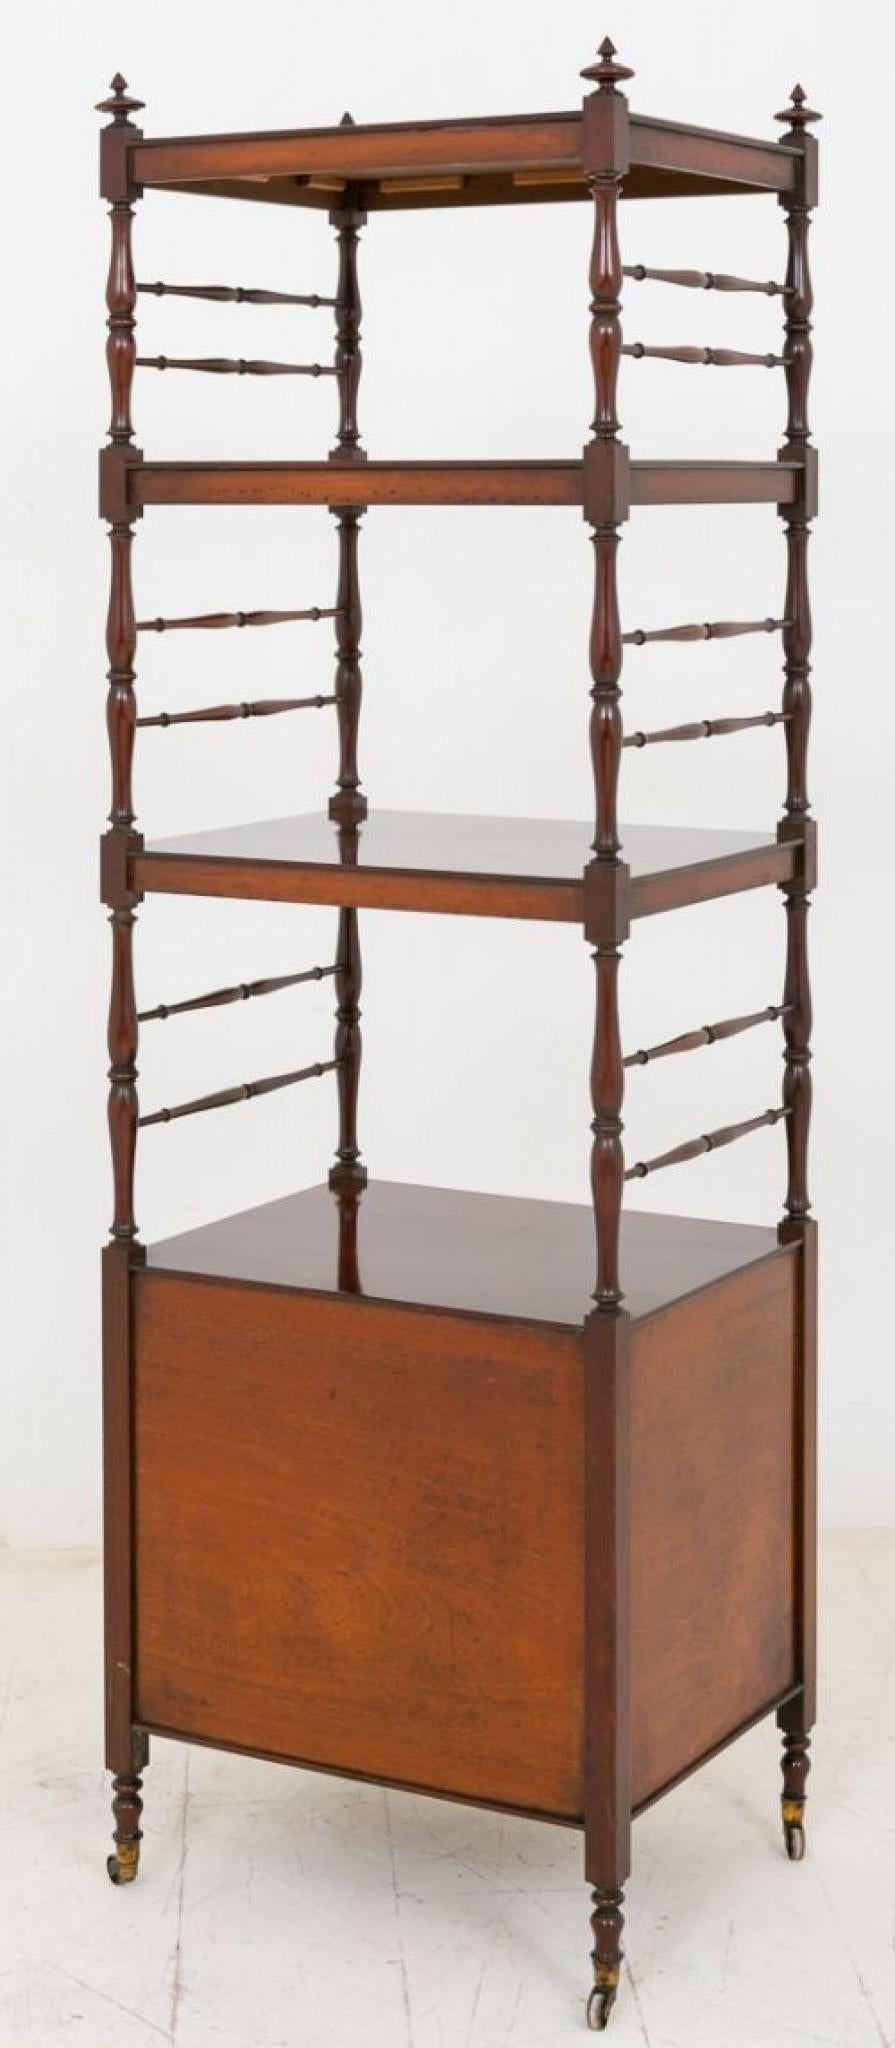 William IV Whatnot Mahogany Bookcase Shelf Unit In Good Condition For Sale In Potters Bar, GB